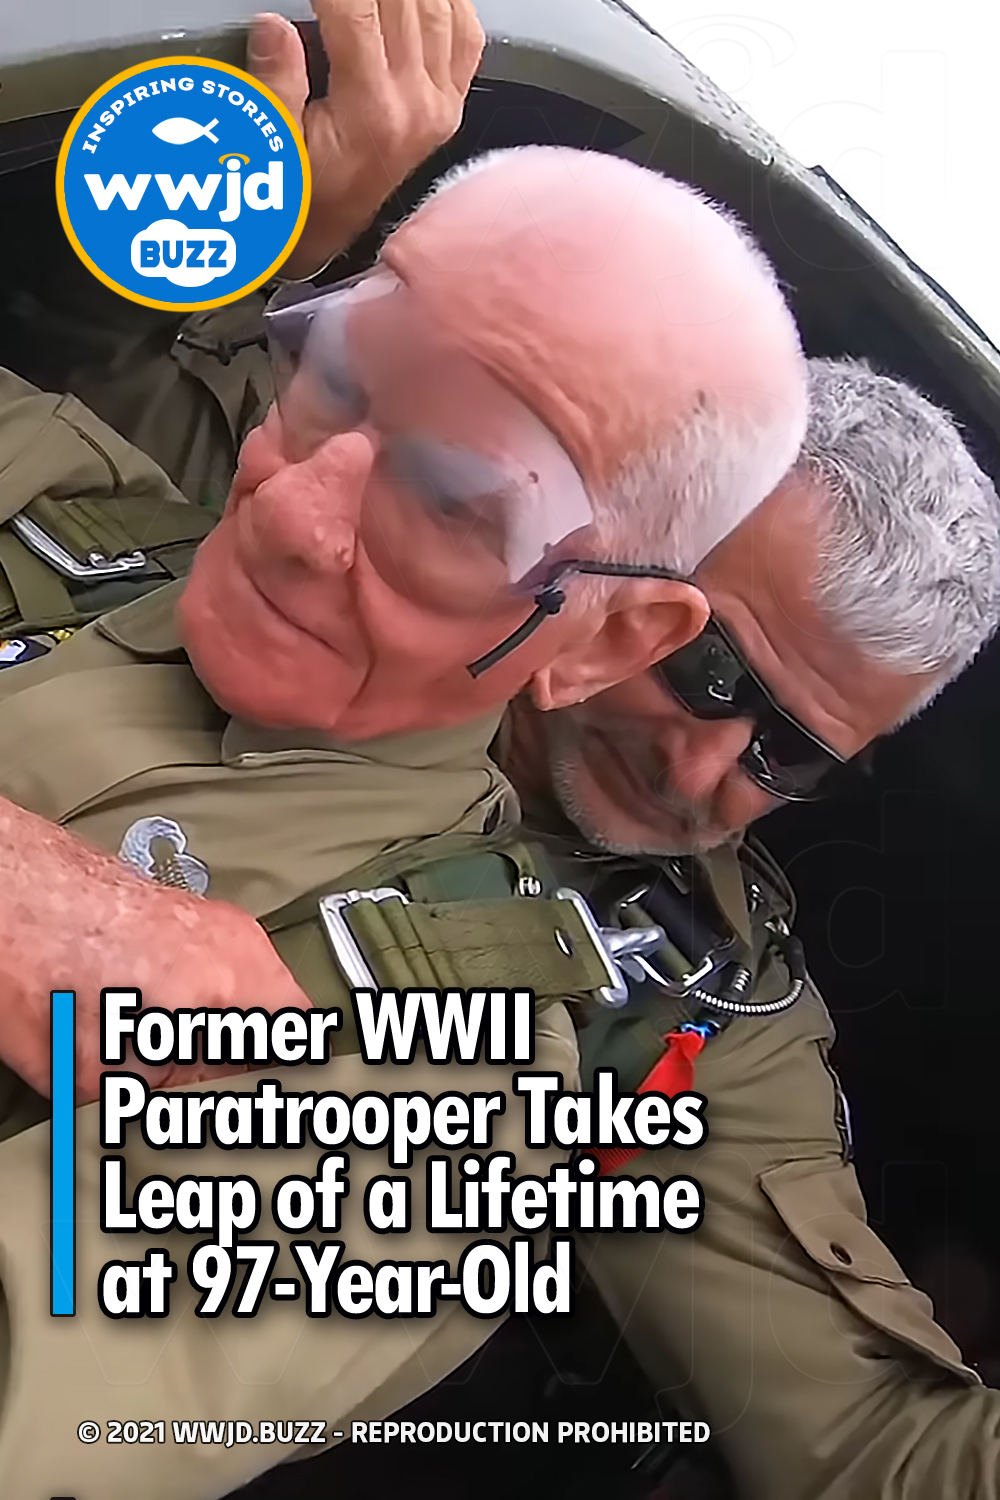 Former WWII Paratrooper Takes Leap of a Lifetime at 97-Year-Old